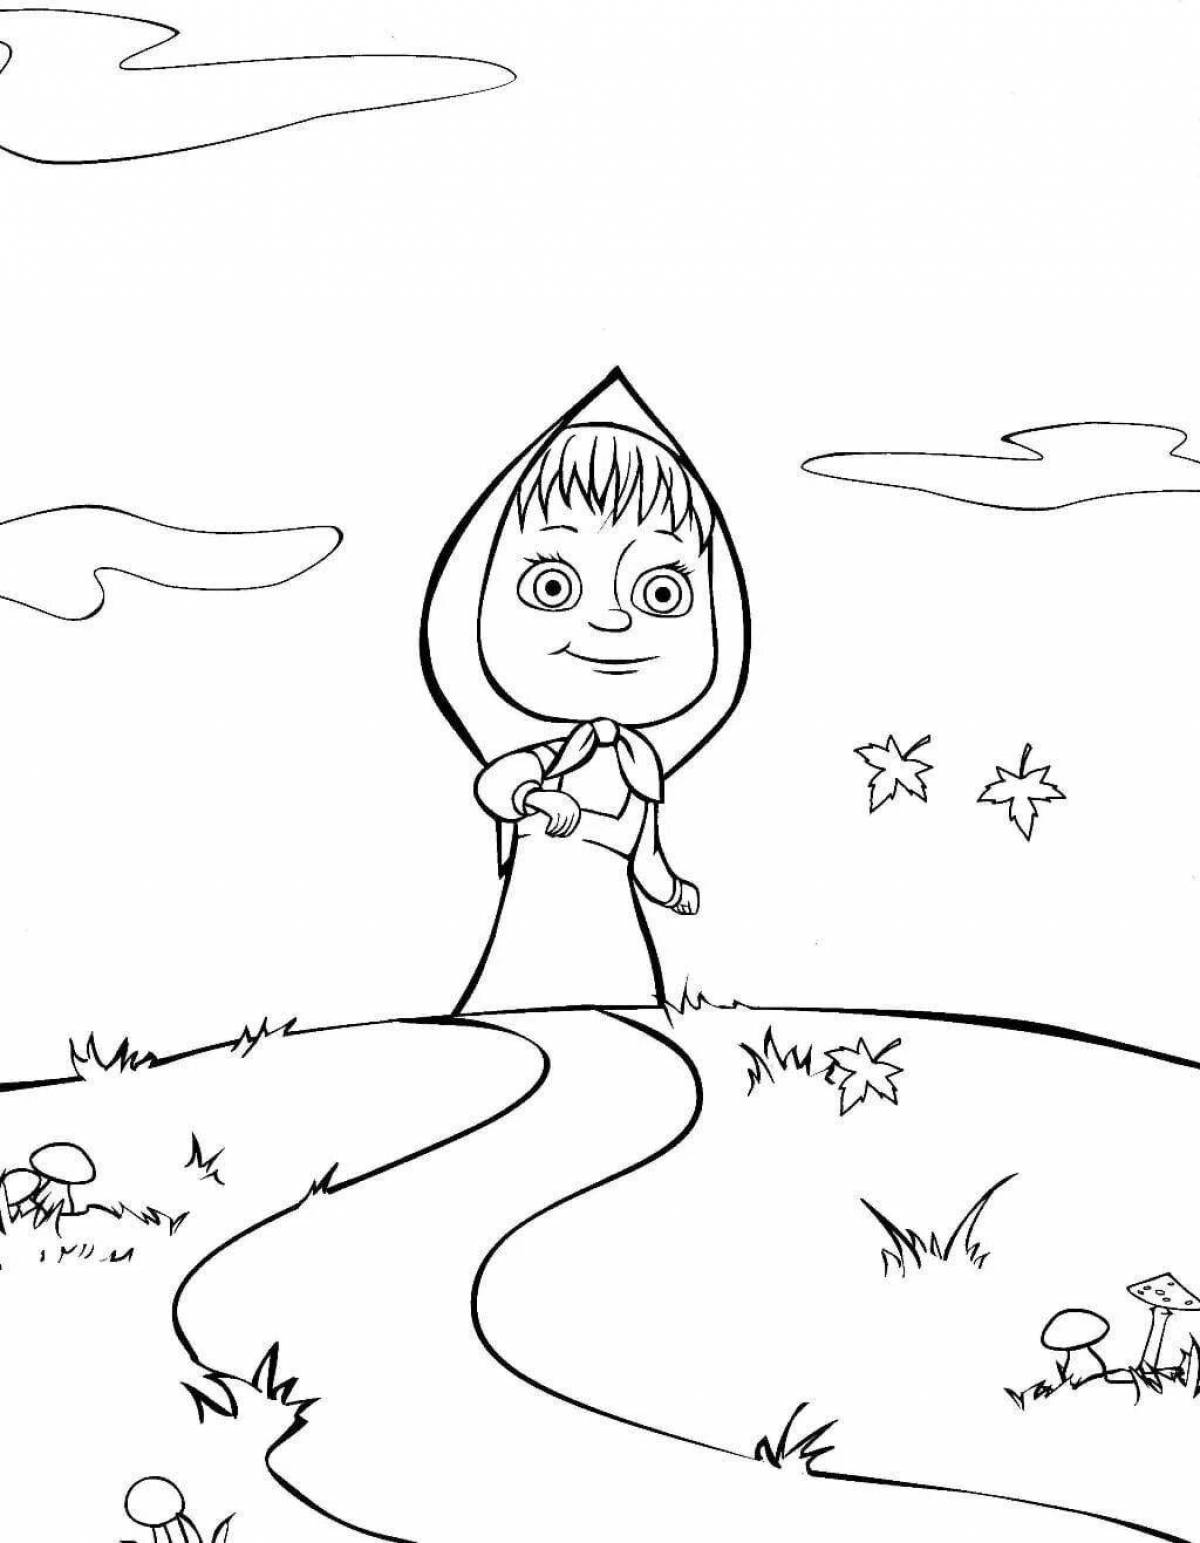 Delightful coloring pages masha and the bear